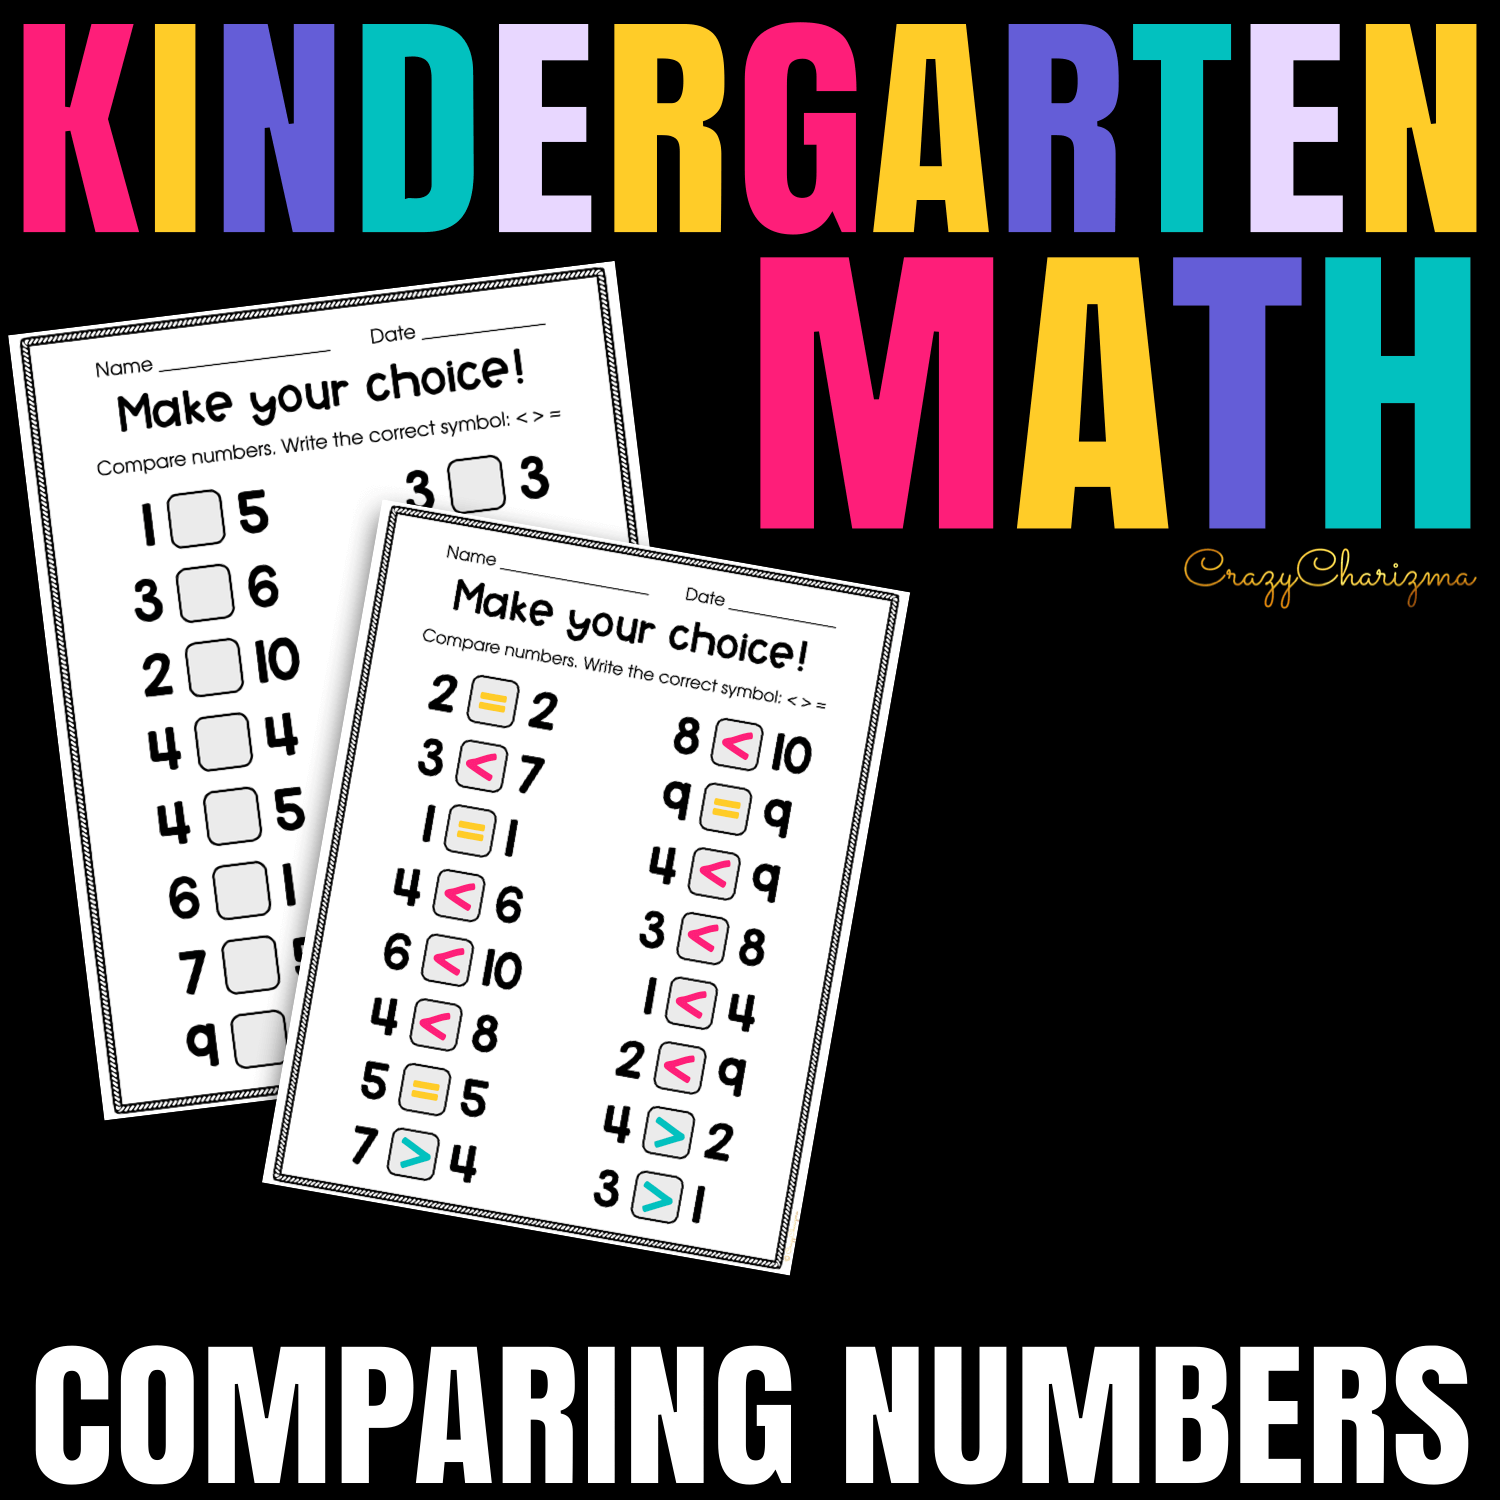 Comparing Numbers Worksheets